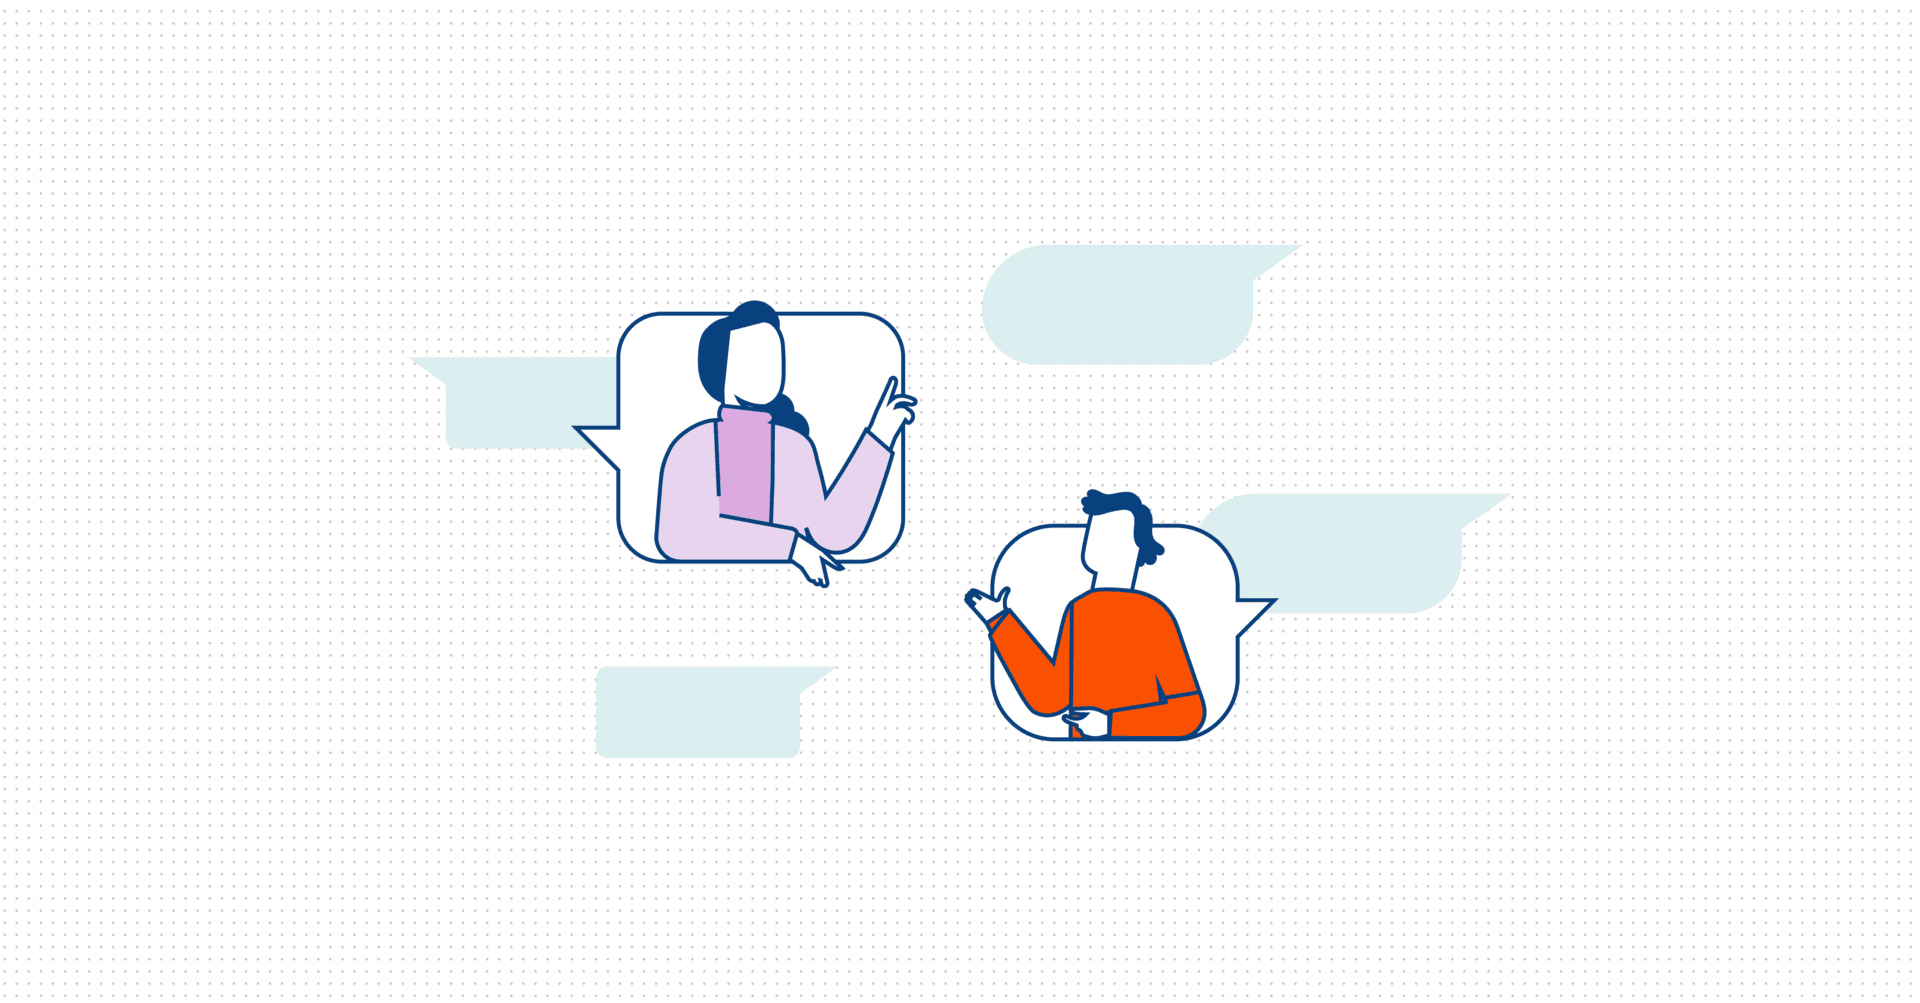 Vector graphic of two people in speech bubbles